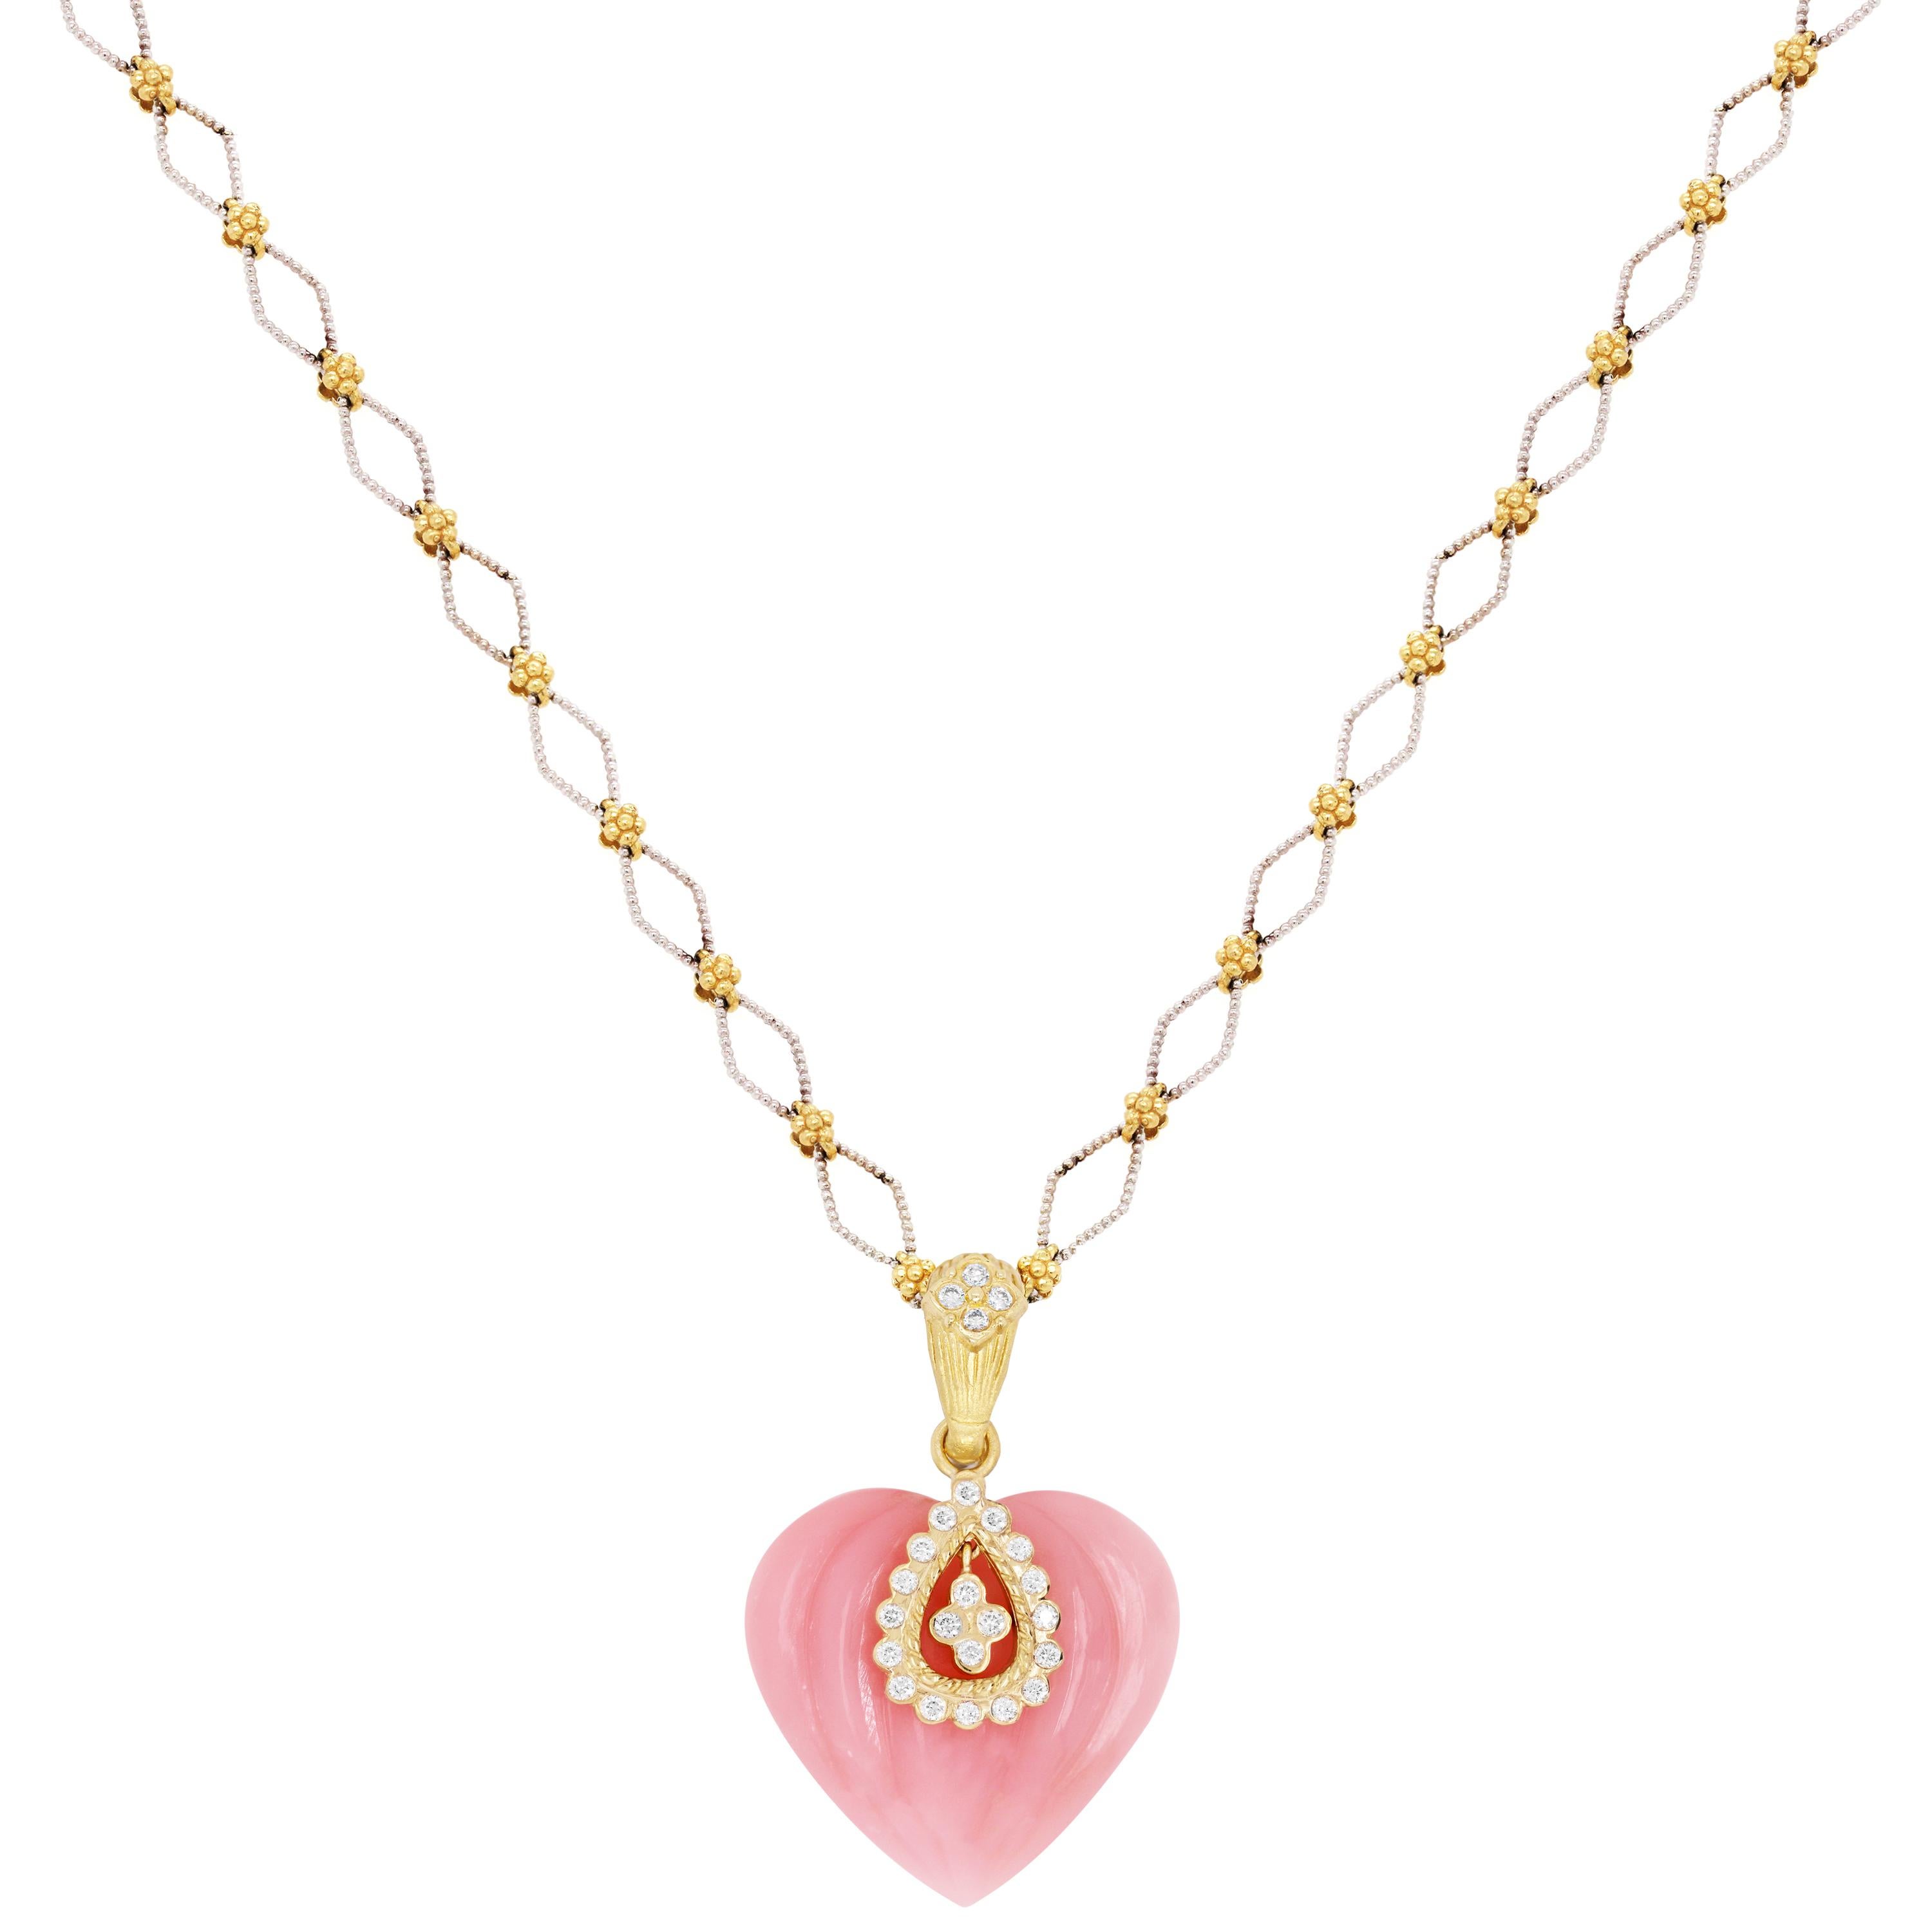 Stambolian Pink Peruvian Opal Gold and Diamond Heart Enhancer Pendant Necklace

Pink opal heart pendant is from the 